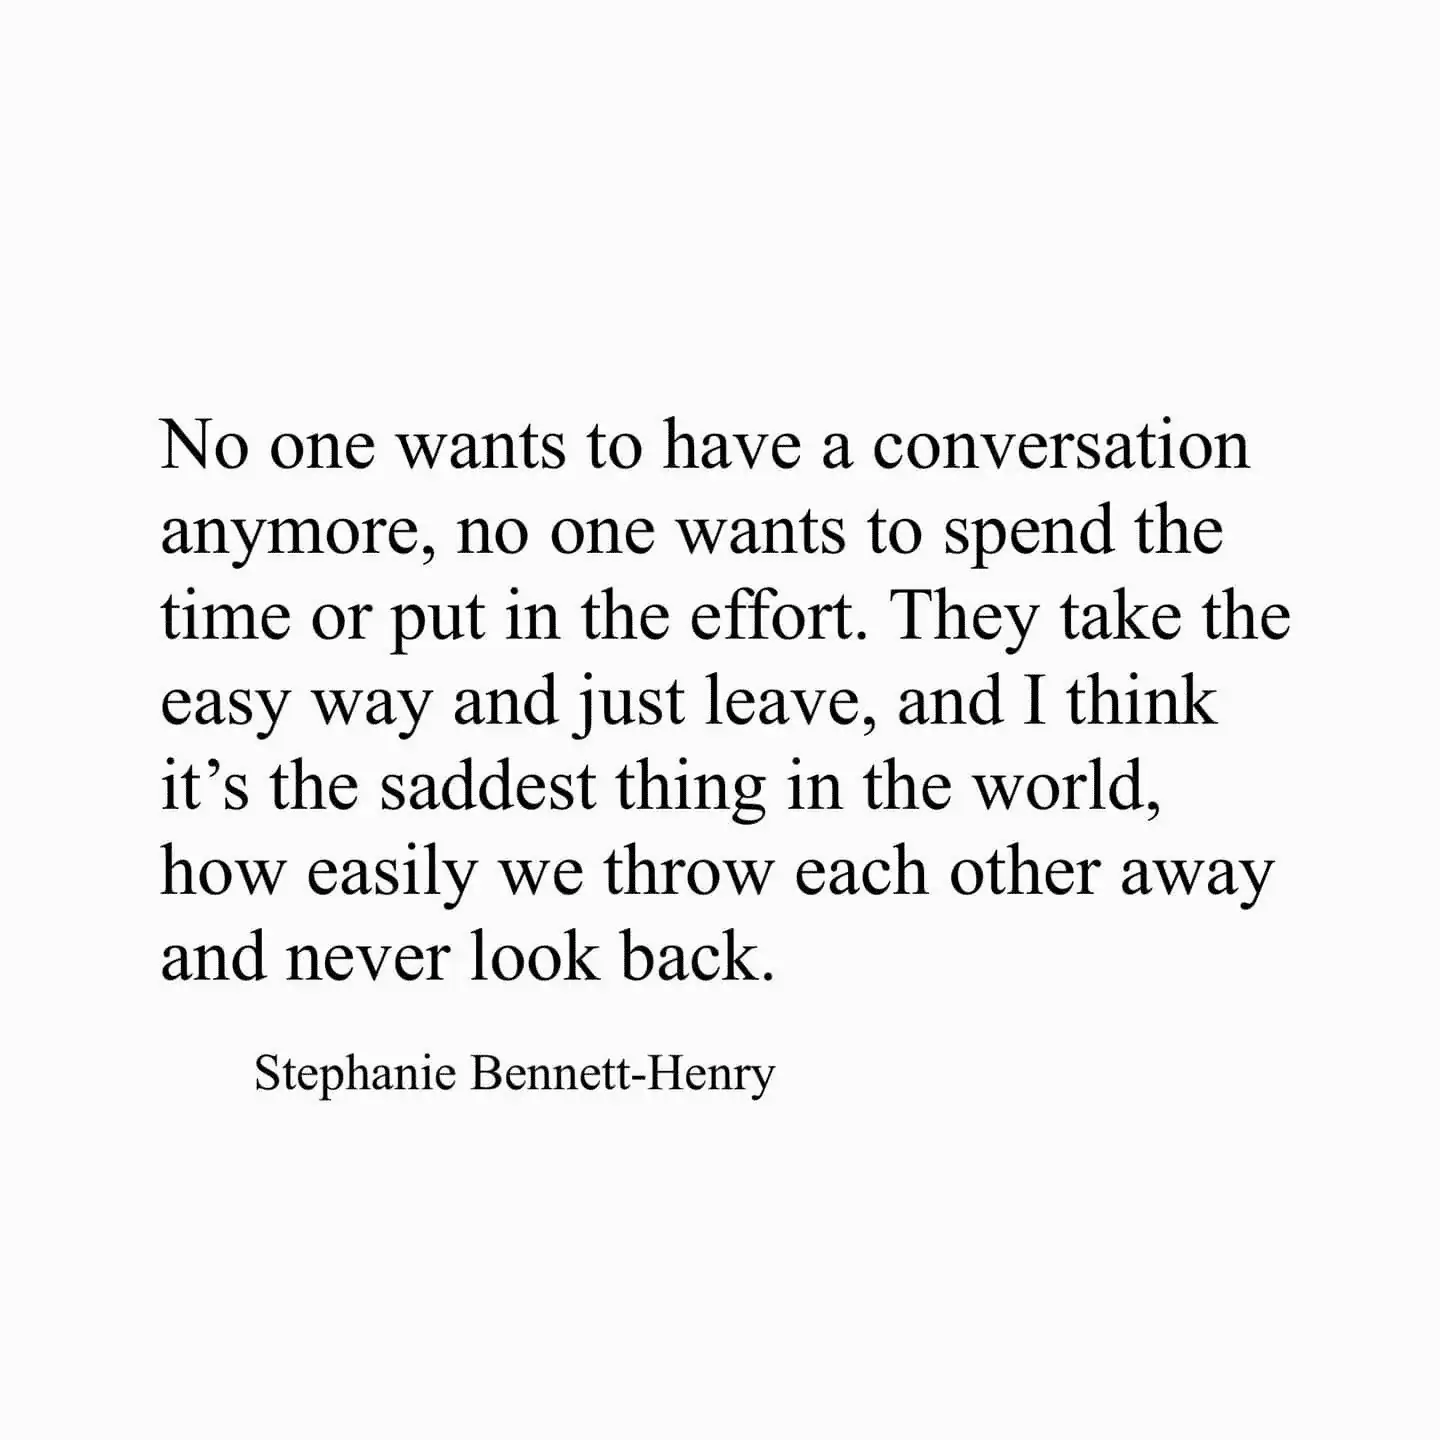 No one wants to have a conversation anymore.